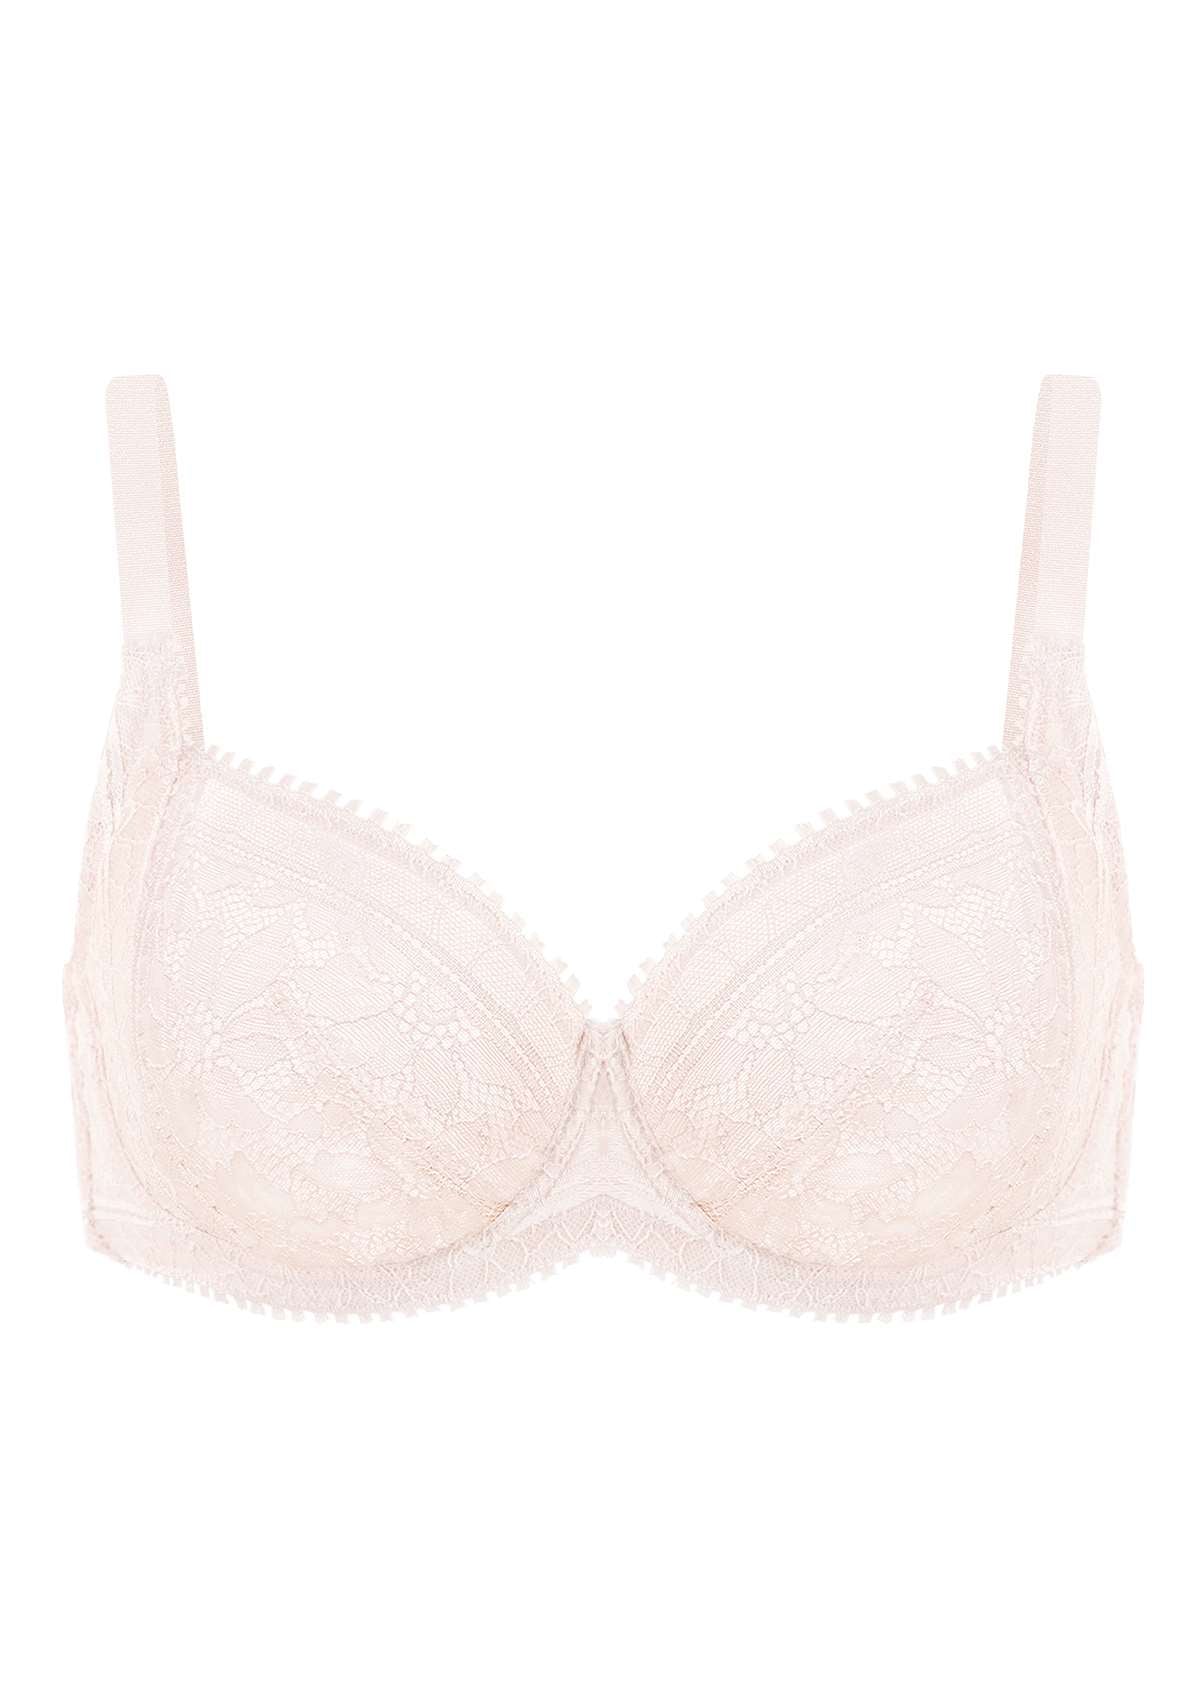 HSIA Silene Floral Delicate Unlined Lace Soft Cup Uplift Bra - Heavenly Pink / 40 / DDD/F